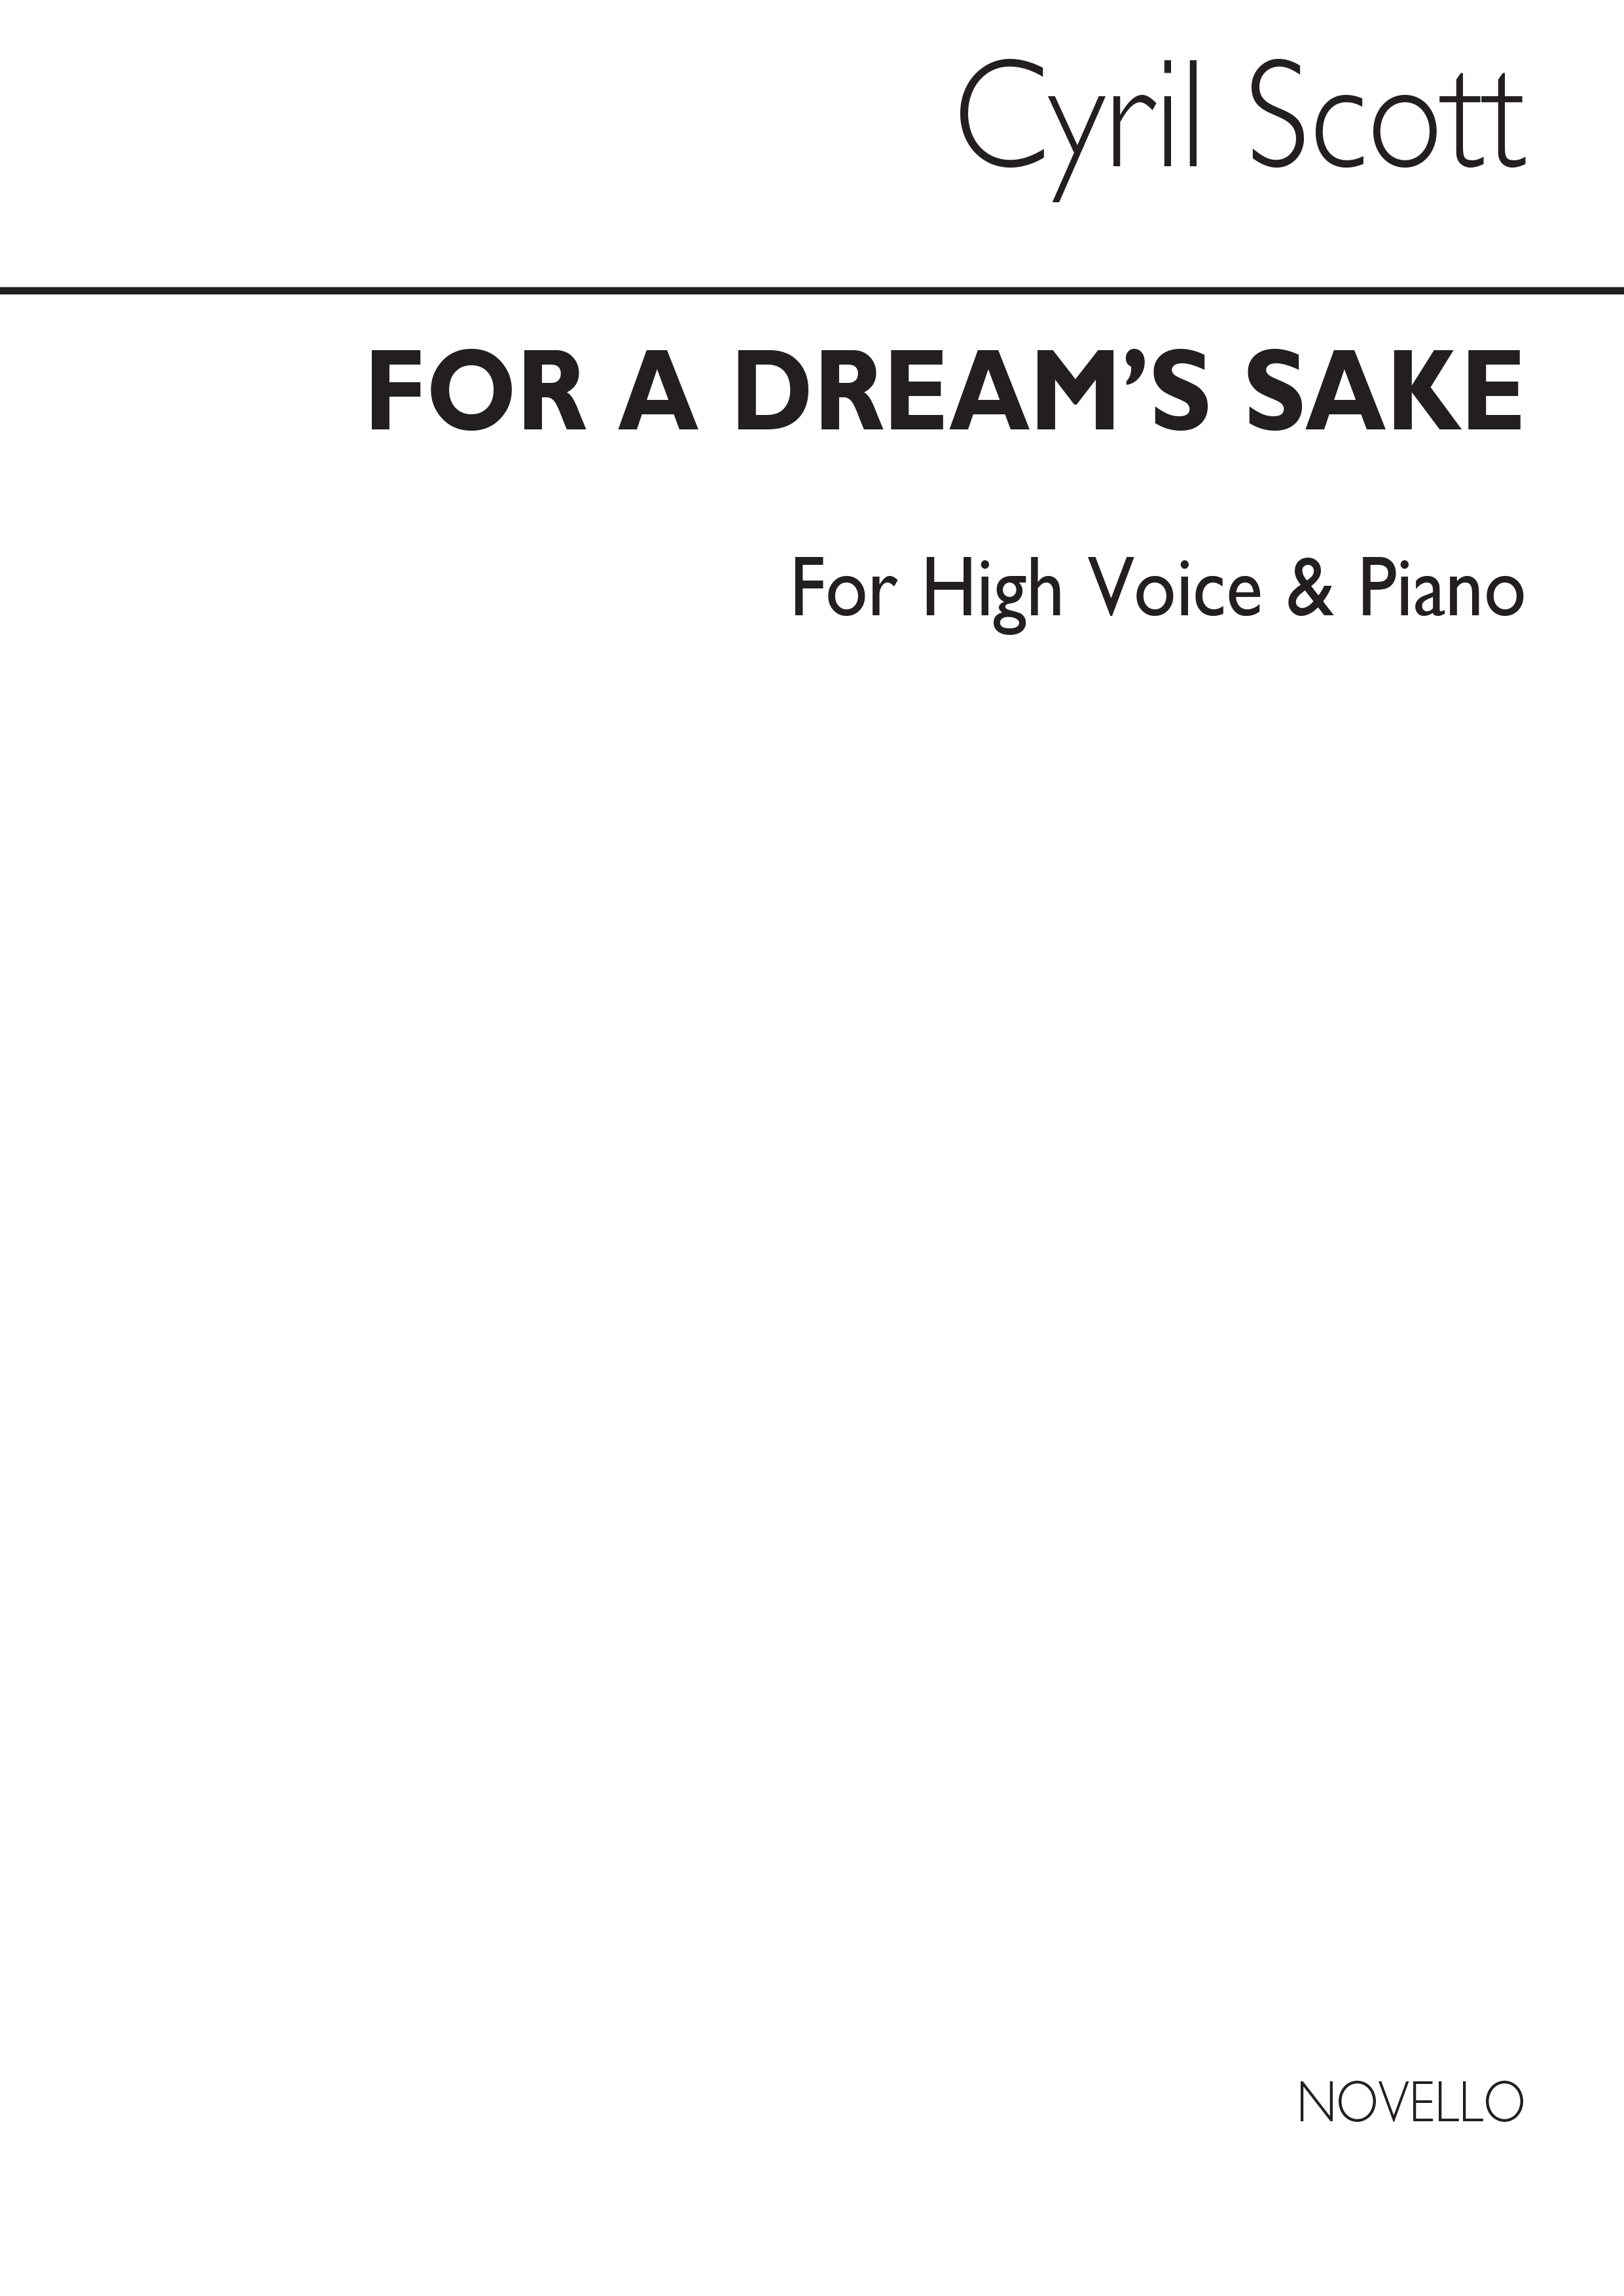 Cyril Scott: For A Dream's Sake-high Voice/Piano (Key-c)